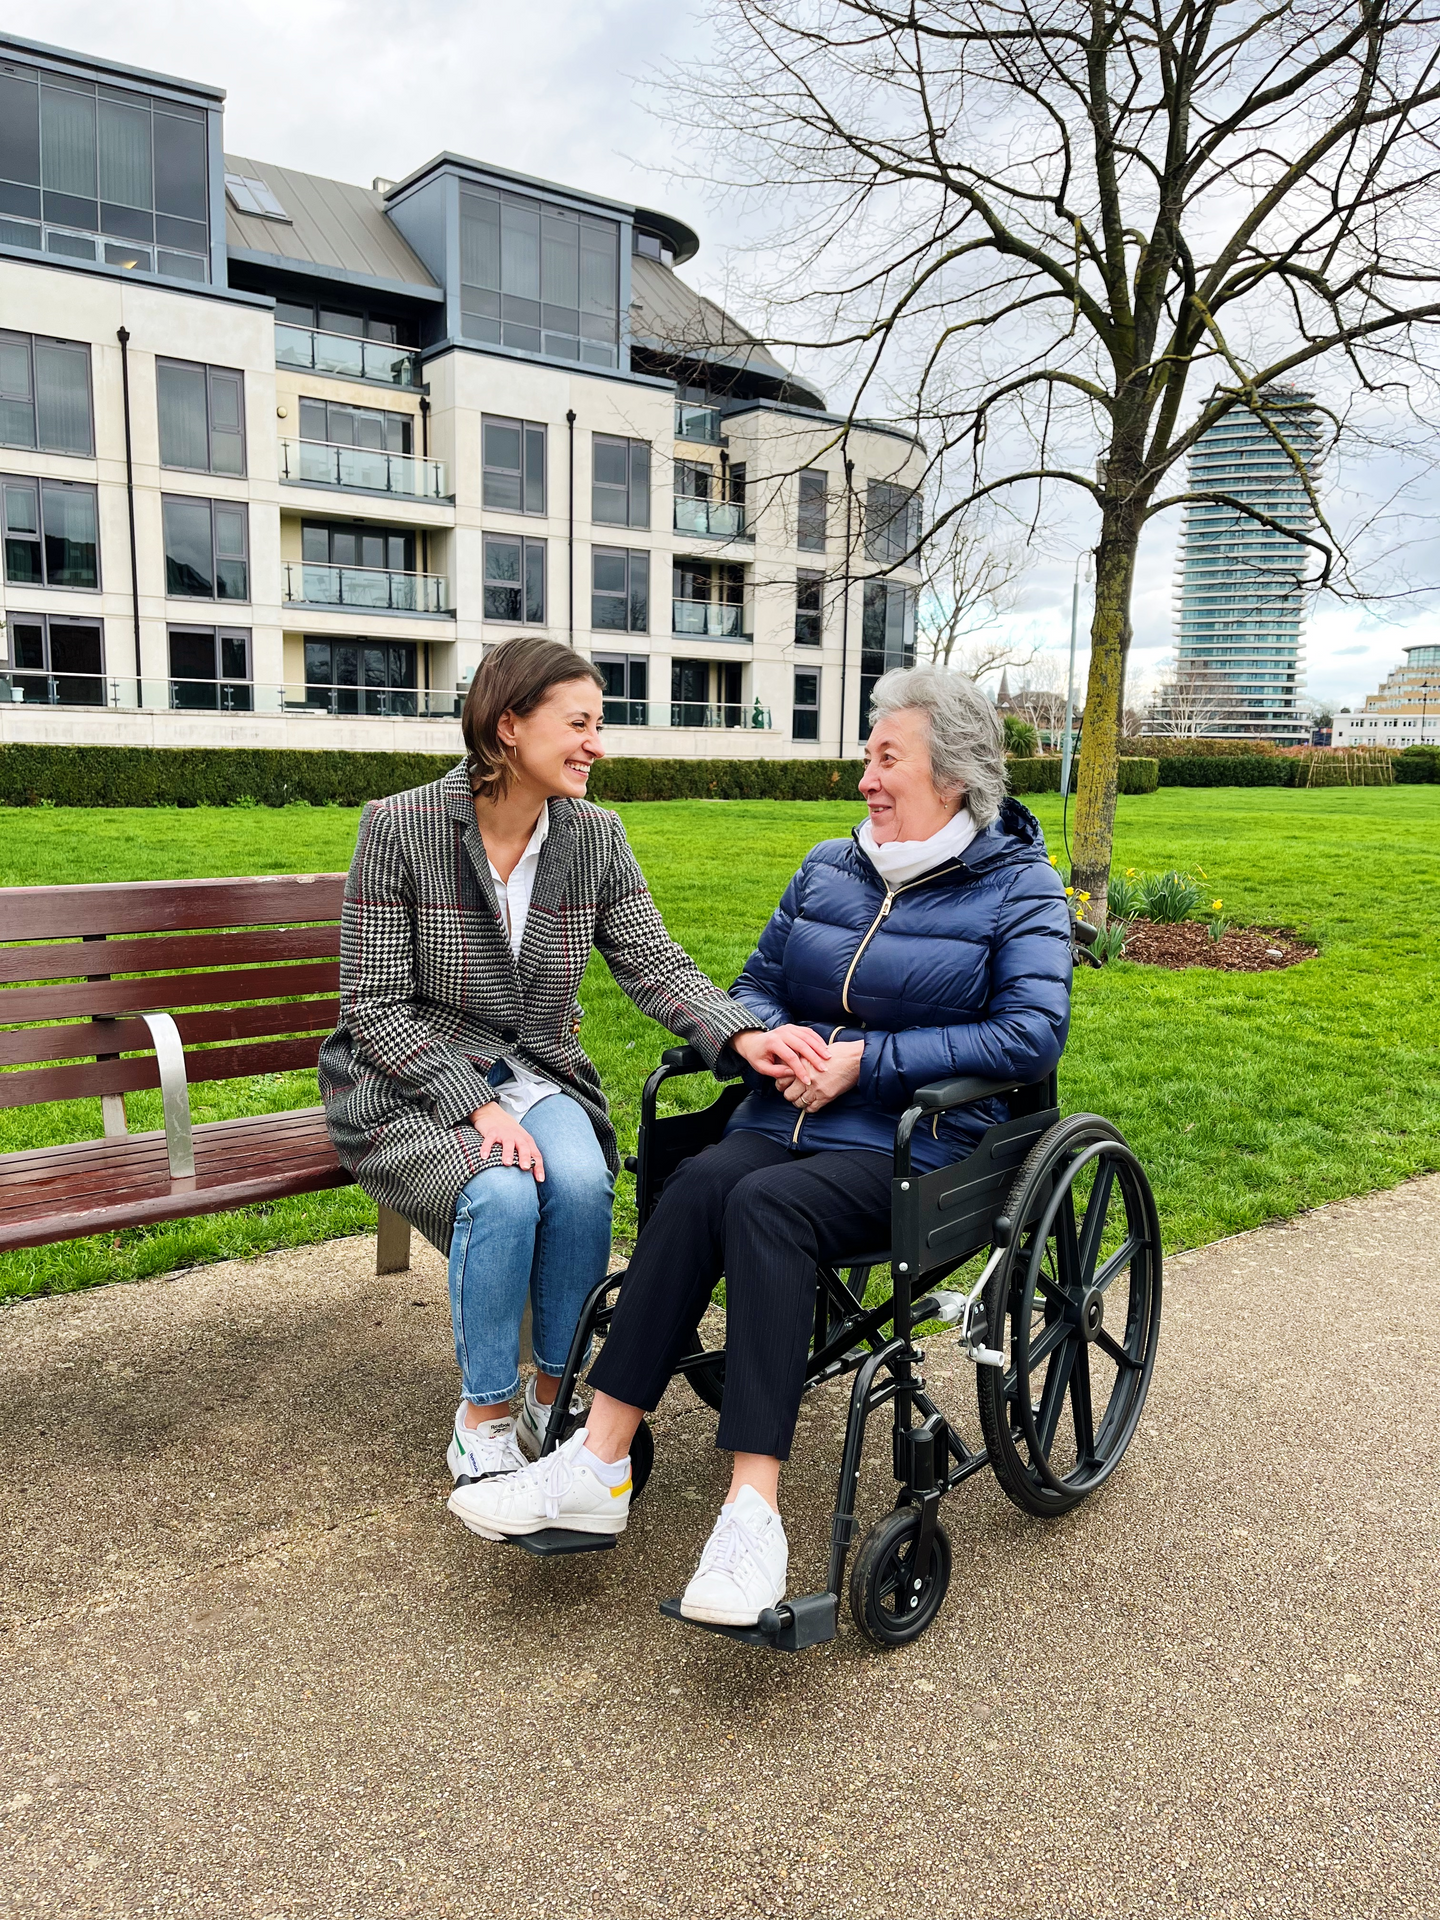 An an image of a woman in a checked coat and blue jeans, sat on a bench with an older woman in a wheelchair parked next to her. They are laughing and the younger woman is touching the older woman's hands.